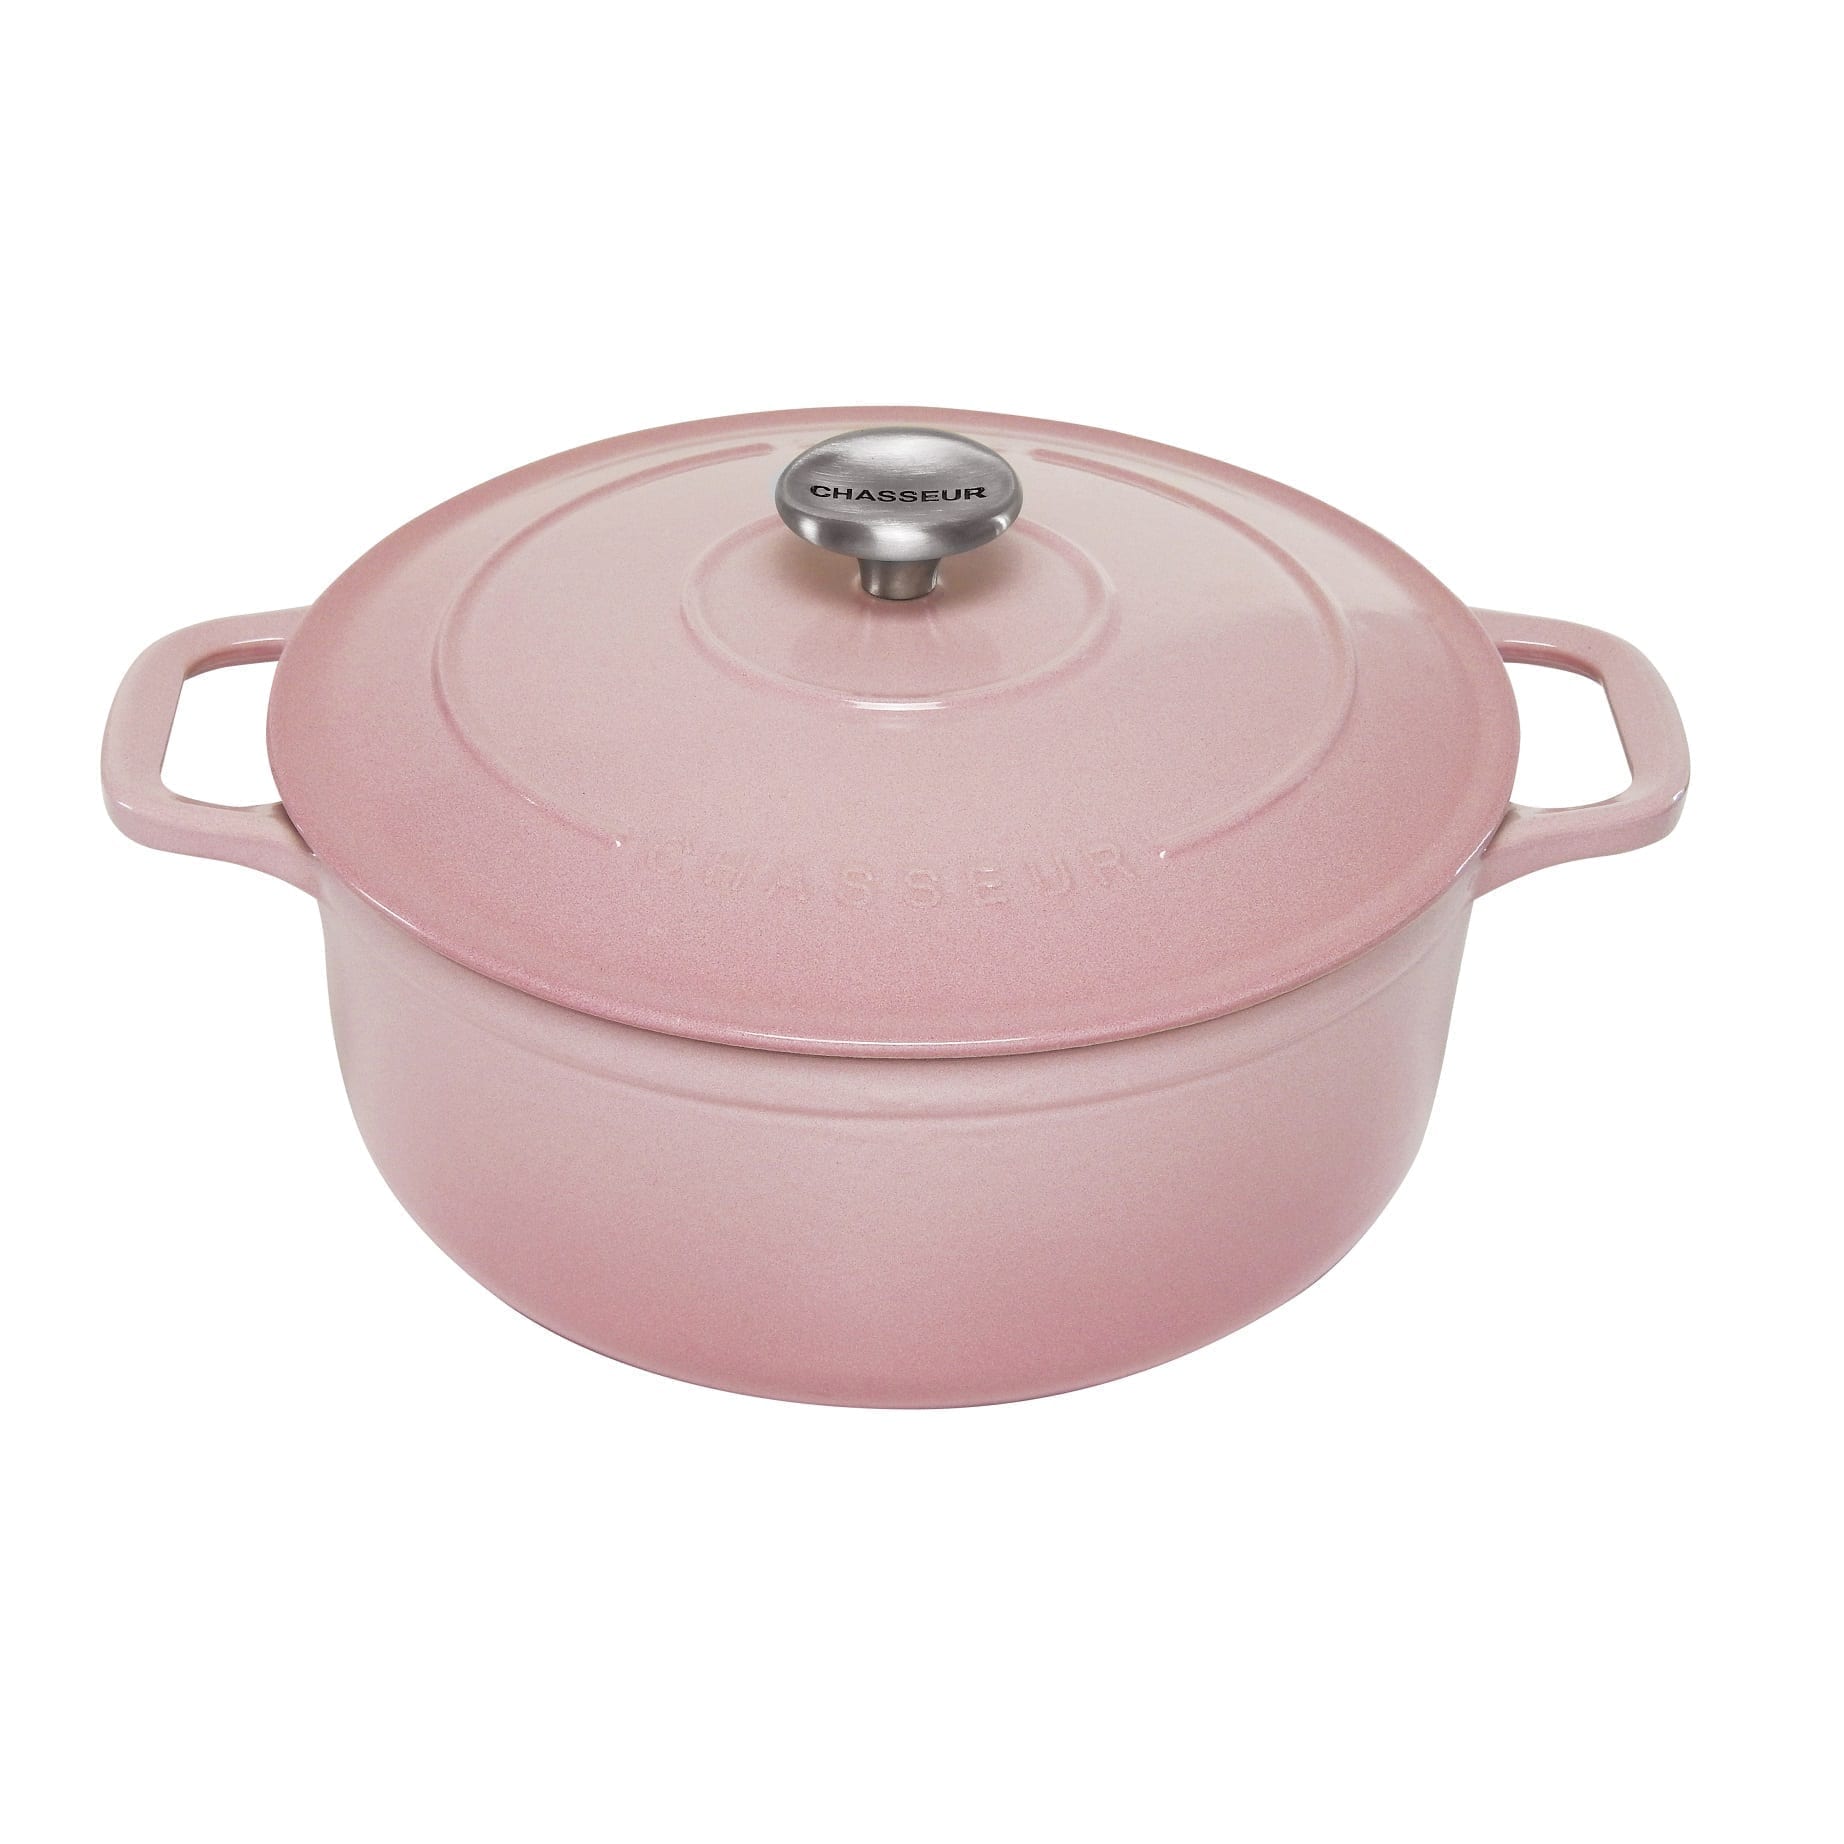 Chasseur Round French Oven Cherry Blossom - Chef Shop